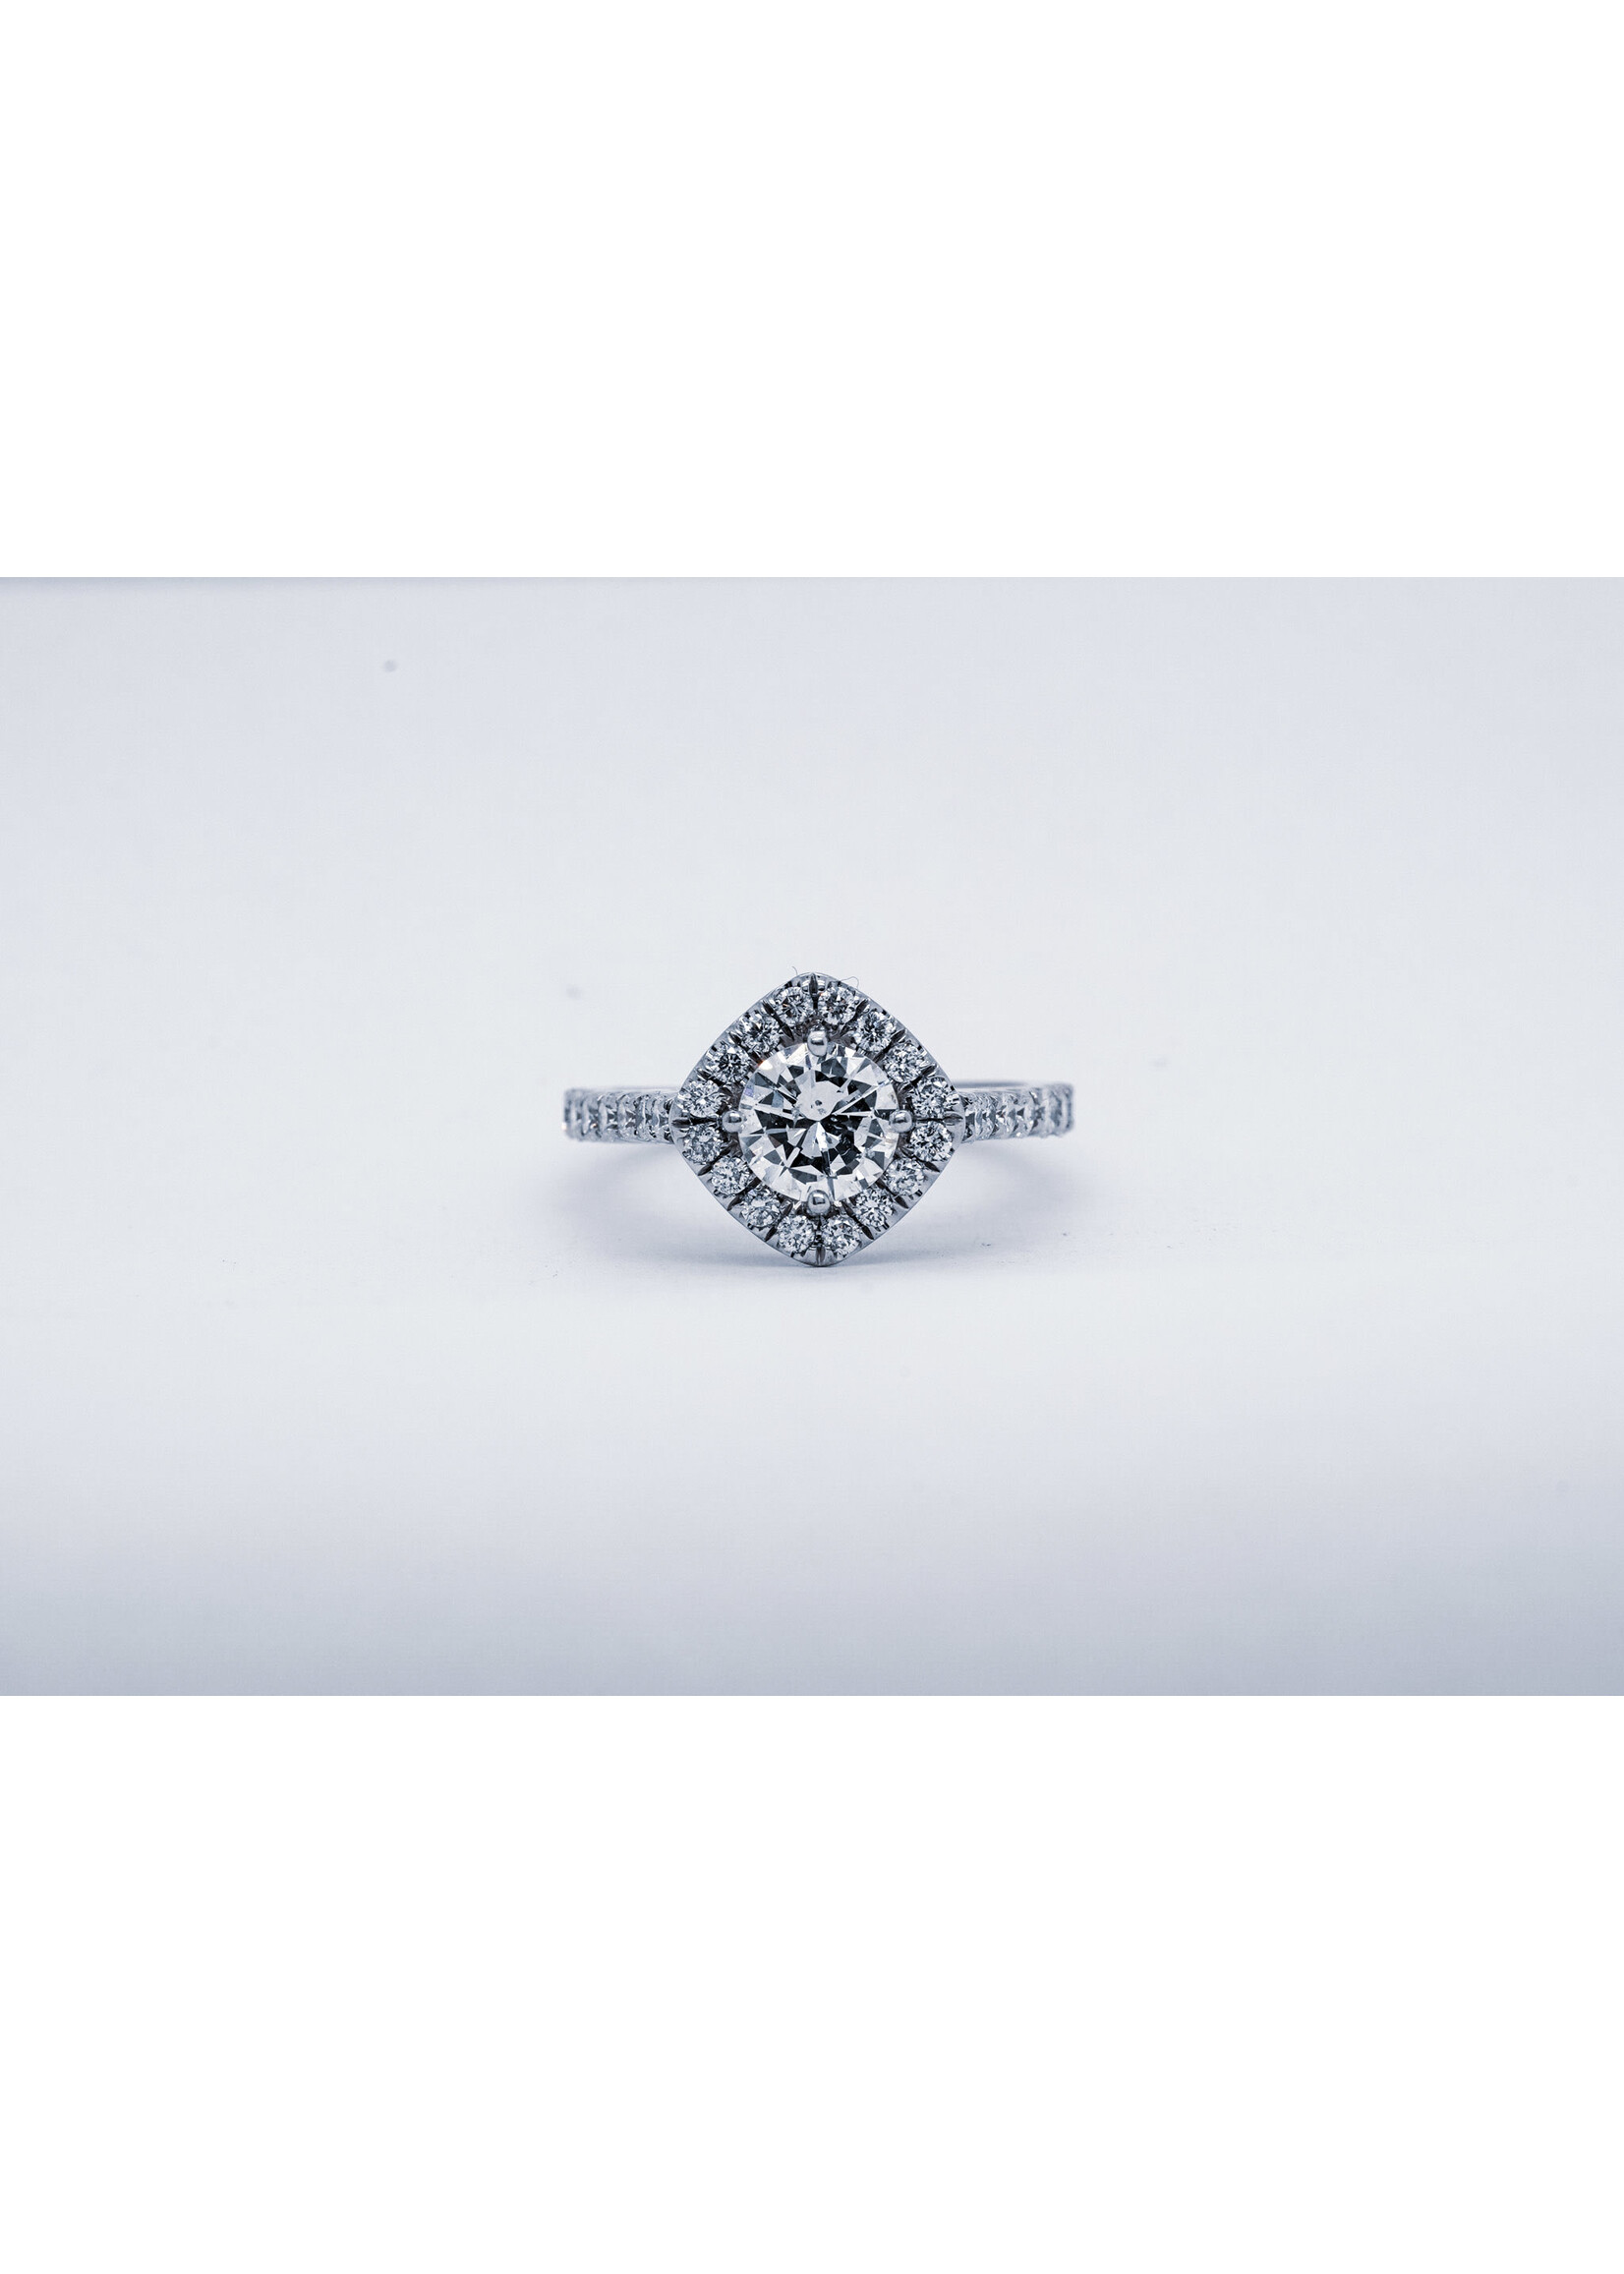 14KW 3.66g 1.50TW (.90CTR) H/SI2 Round Diamond Halo Engagement Ring (size 6)